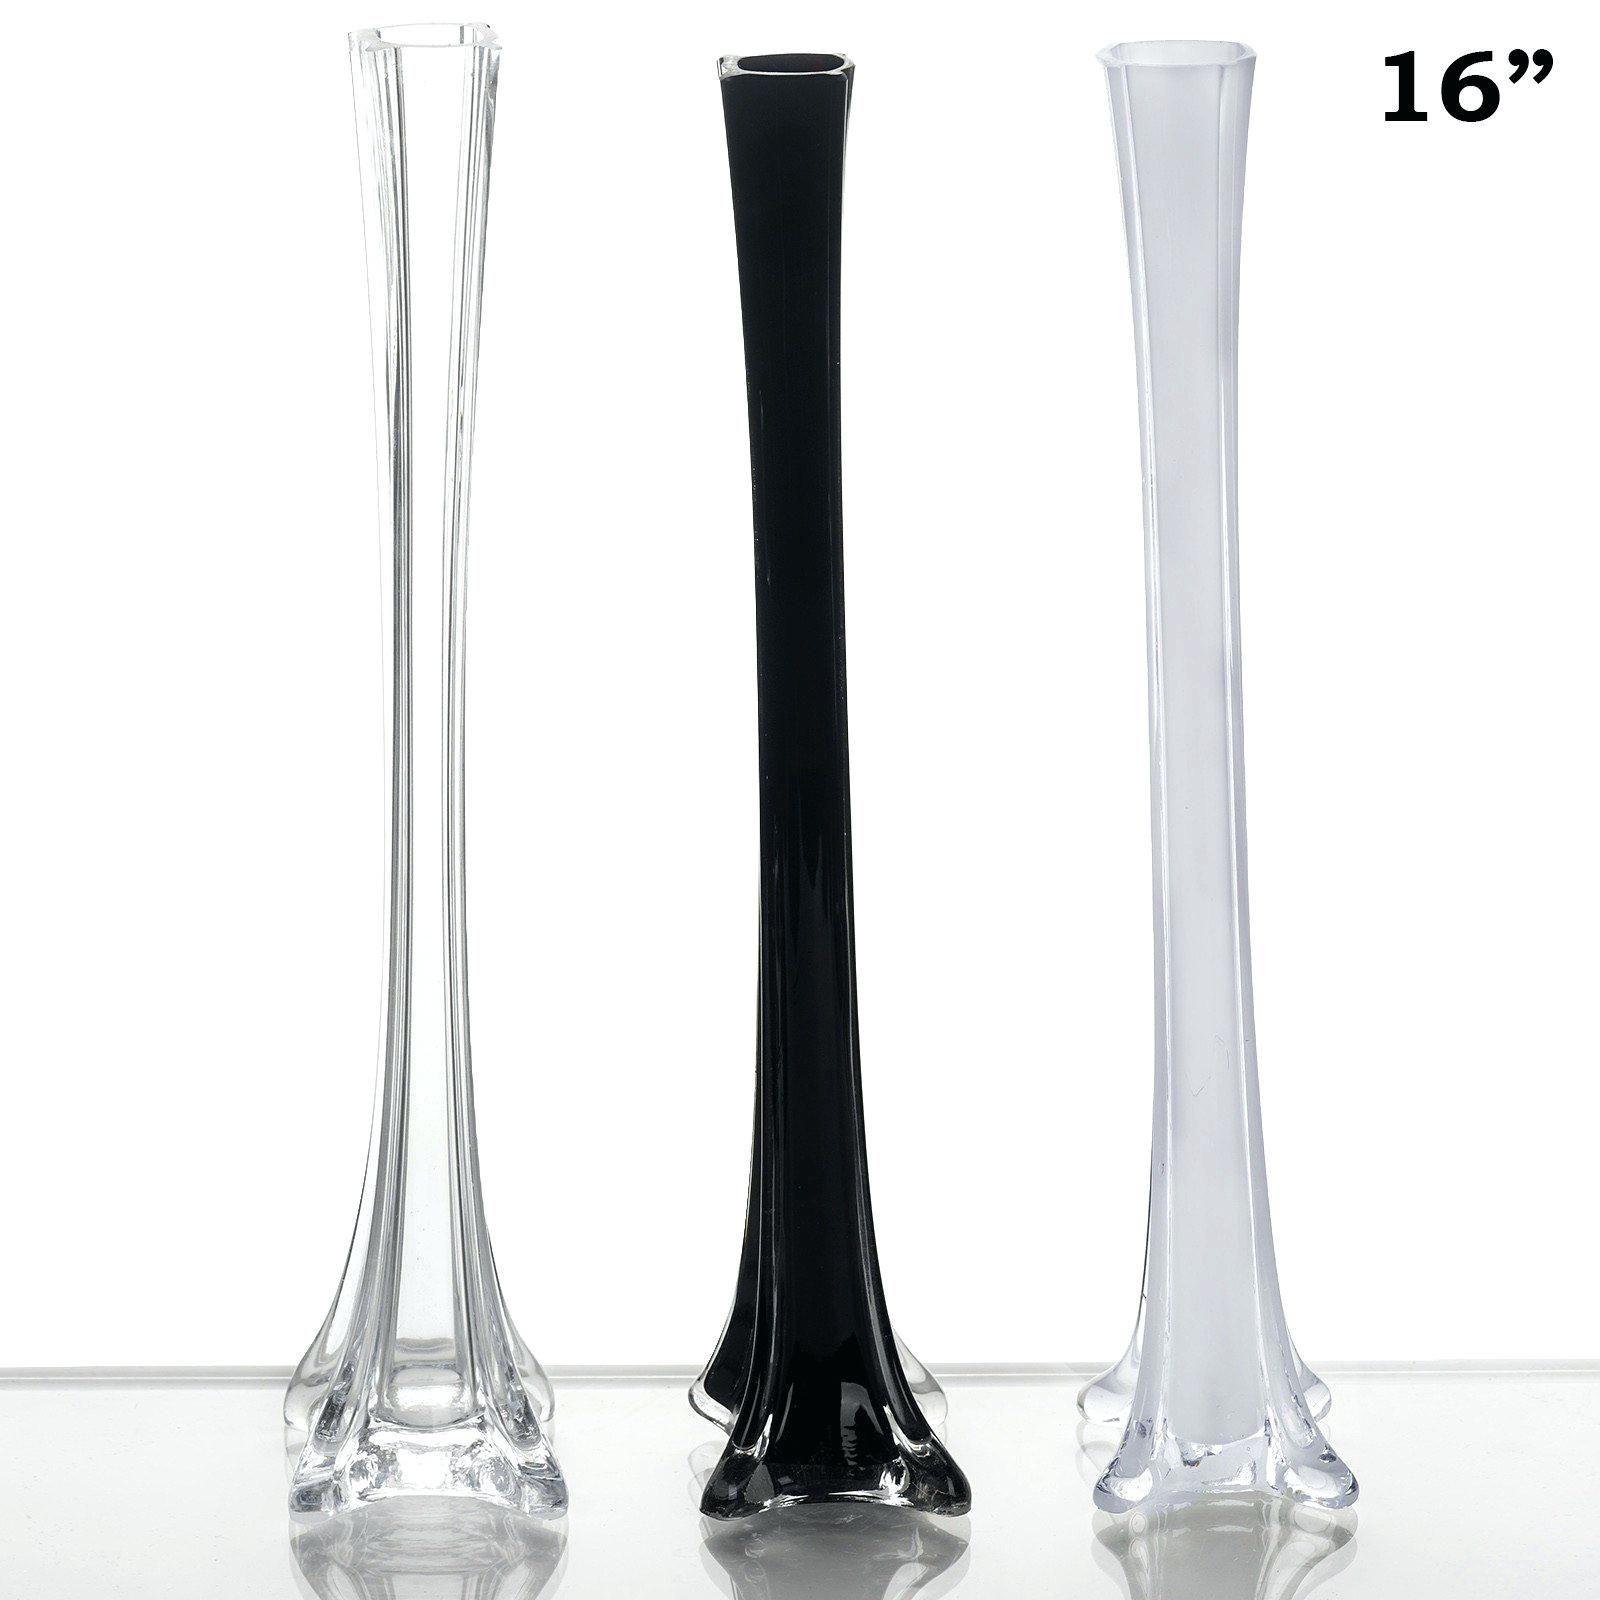 29 Great Types Of Glass Vases 2024 free download types of glass vases of 40 glass vases bulk the weekly world within gallery plastic eiffel tower vases wholesale drawings art gallery